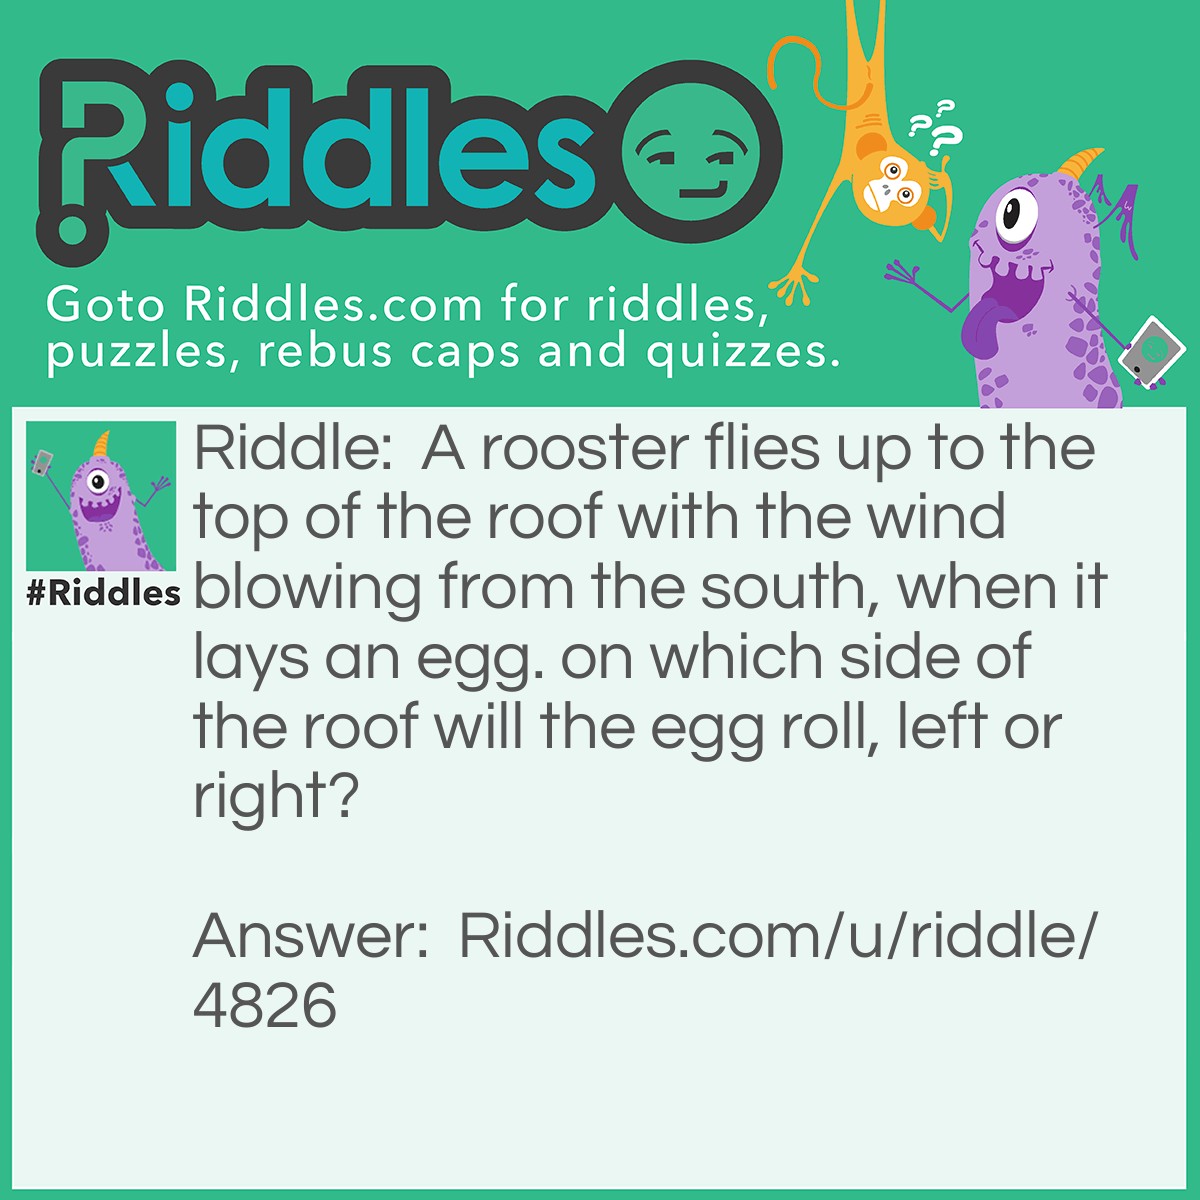 Riddle: A rooster flies up to the top of the roof with the wind blowing from the south, when it lays an egg. on which side of the roof will the egg roll, left or right? Answer: Neither! When did roosters lay eggs?